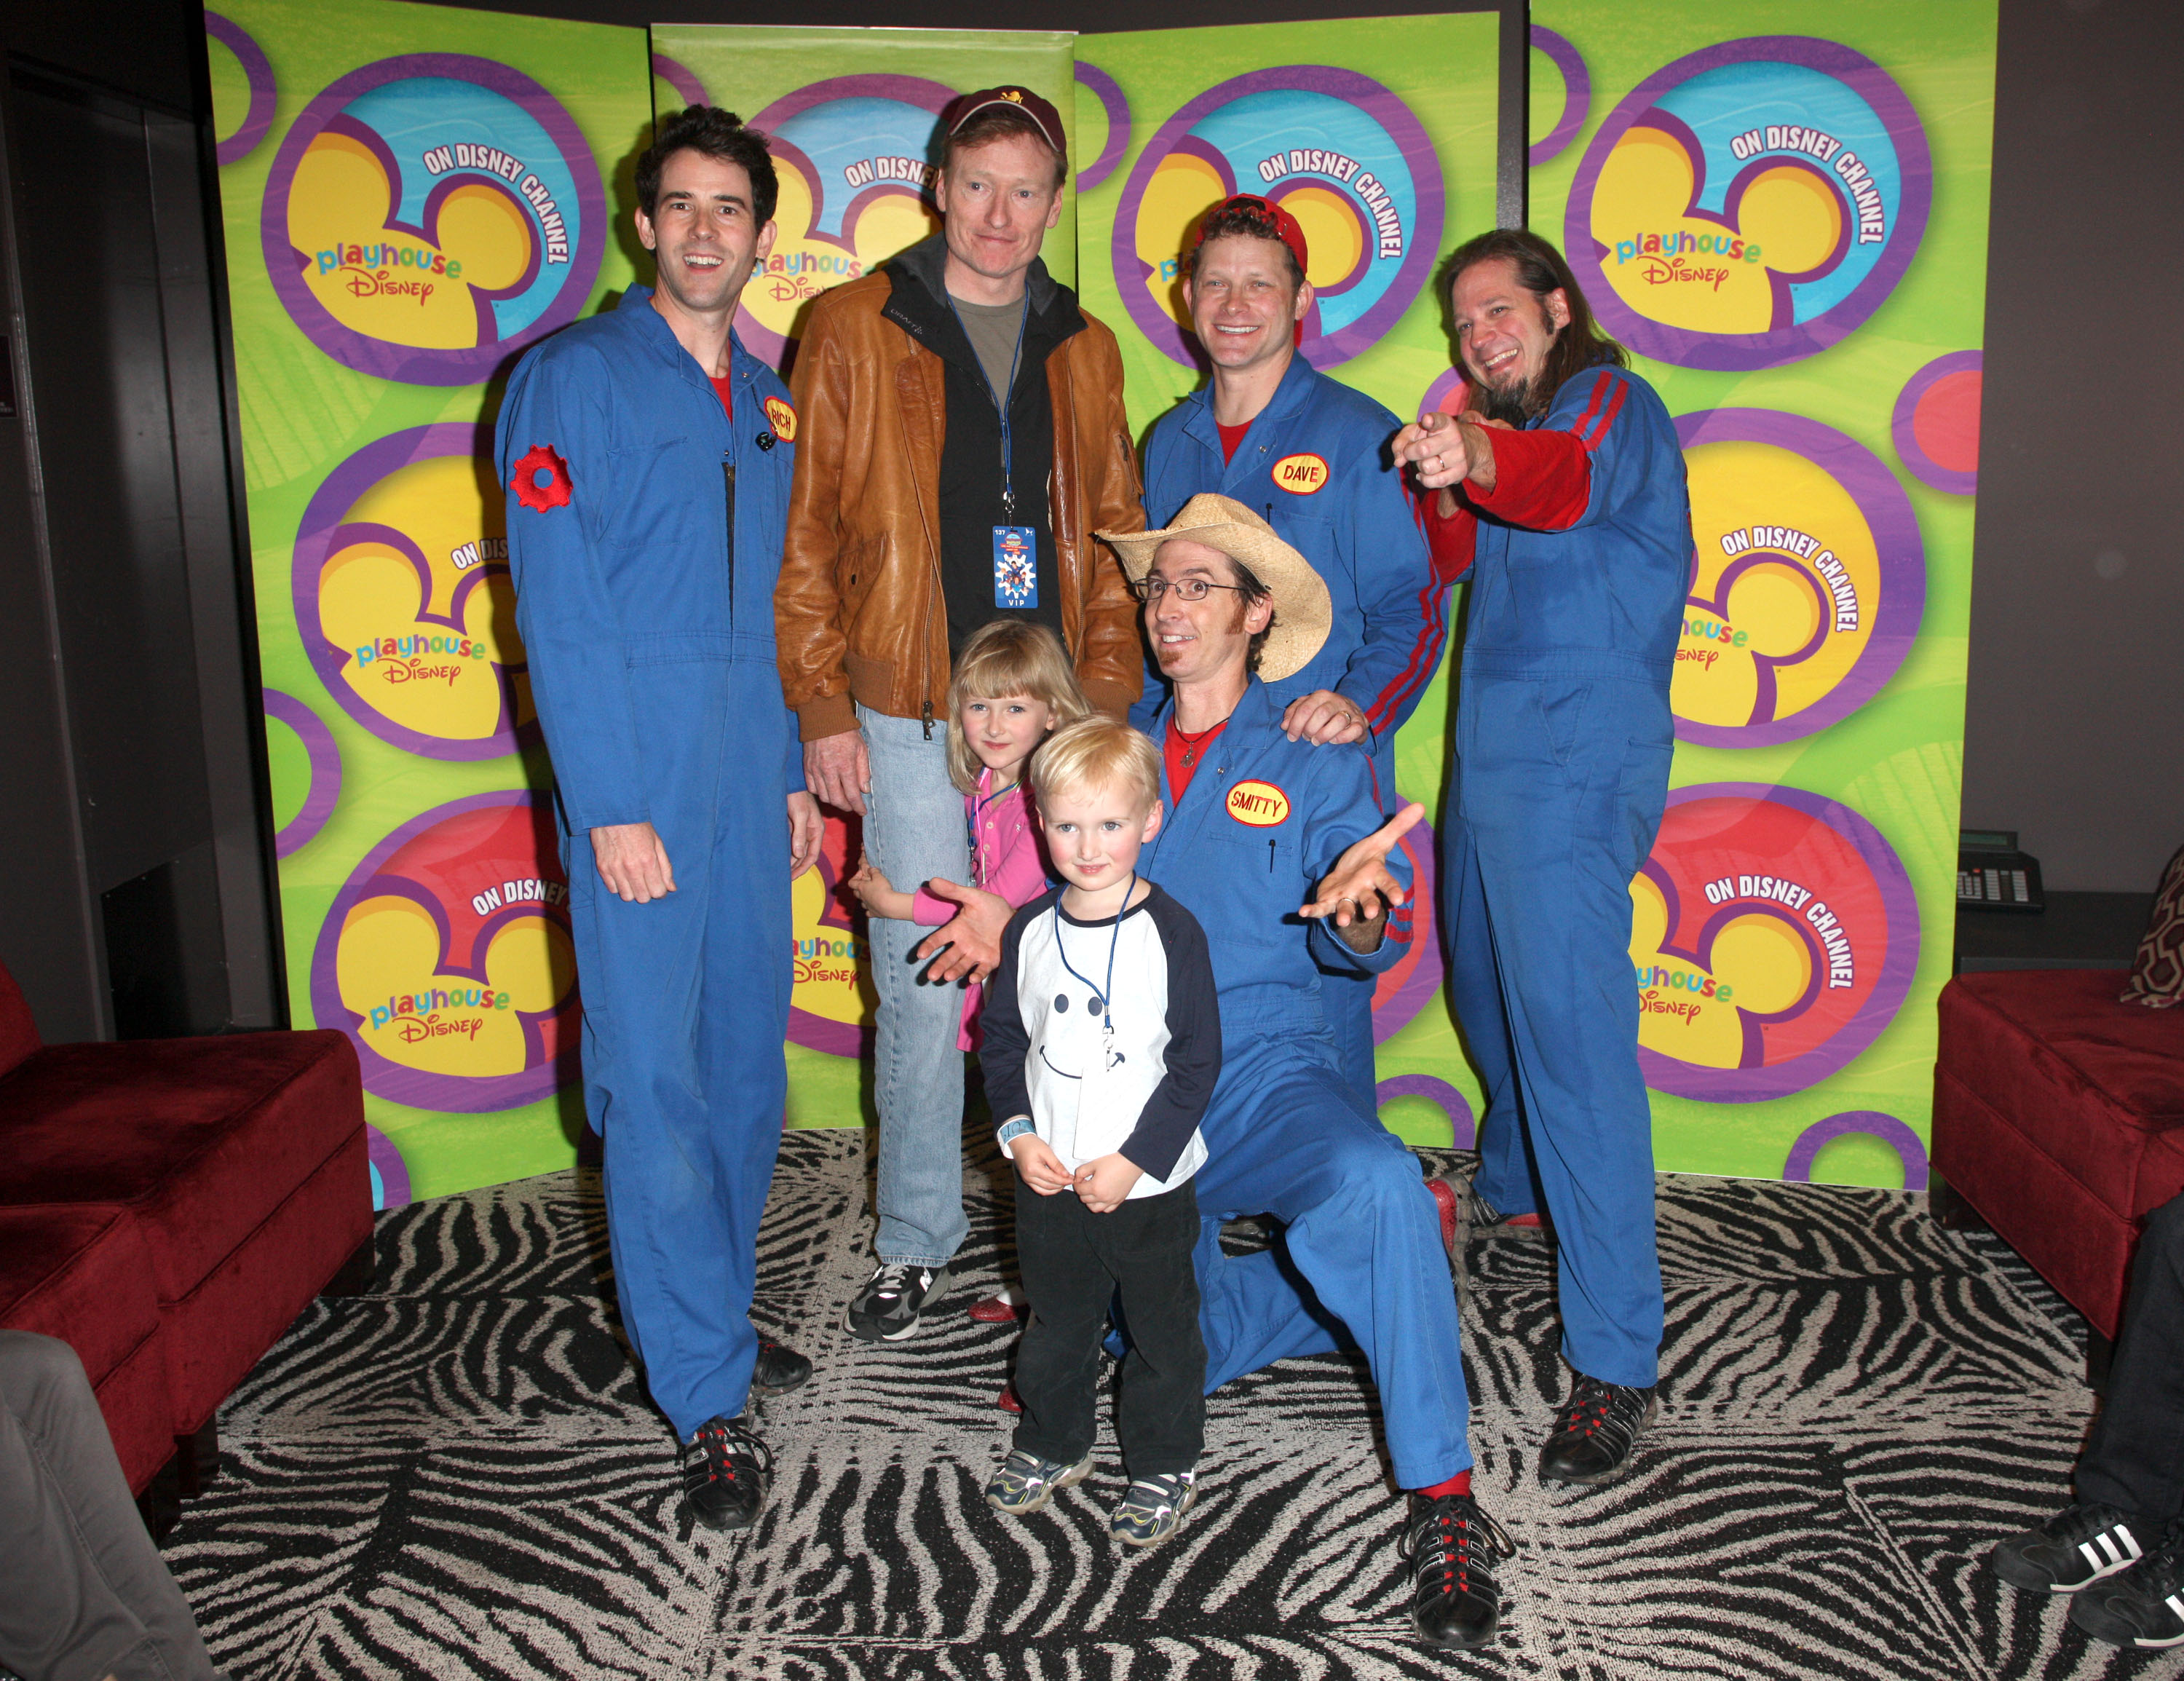 Rich Collins, Conan O'Brien, Neve O'Brien, Beckett O'Brien, Scott Smith, David Poche, and Scott Durbin with Disney's Imagination Movers at their first-ever U.S. concert tour on December 5, 2009, in Los Angeles | Source: Getty Images